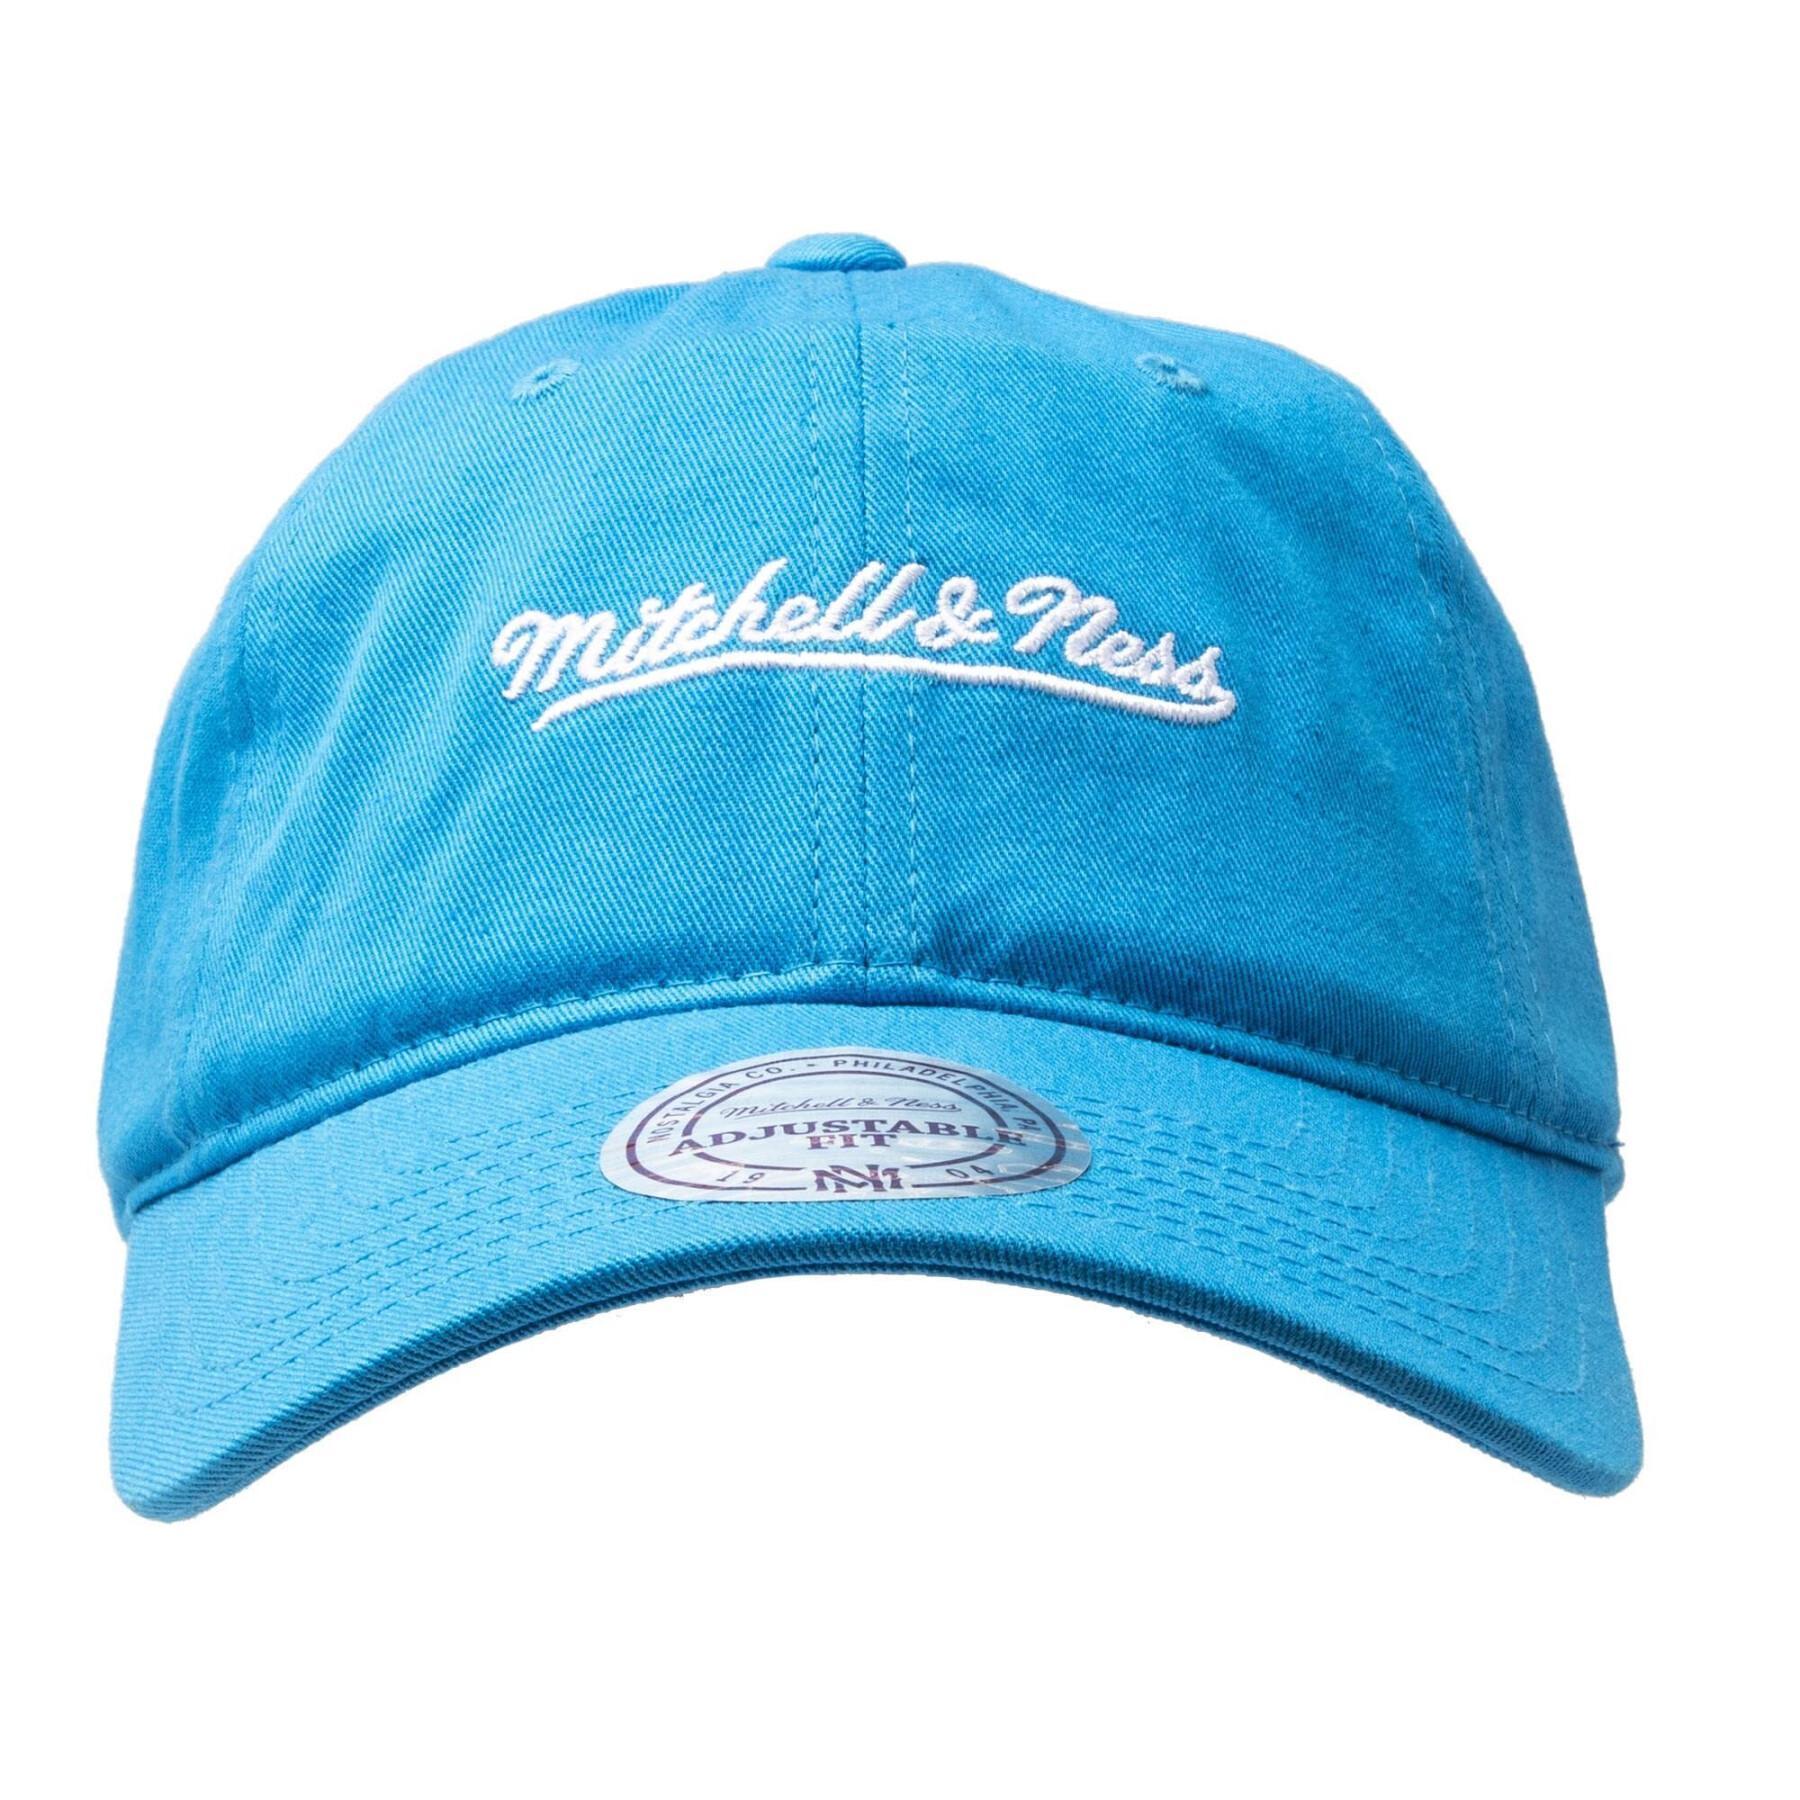 Kappe Mitchell & Ness washed cotton dad